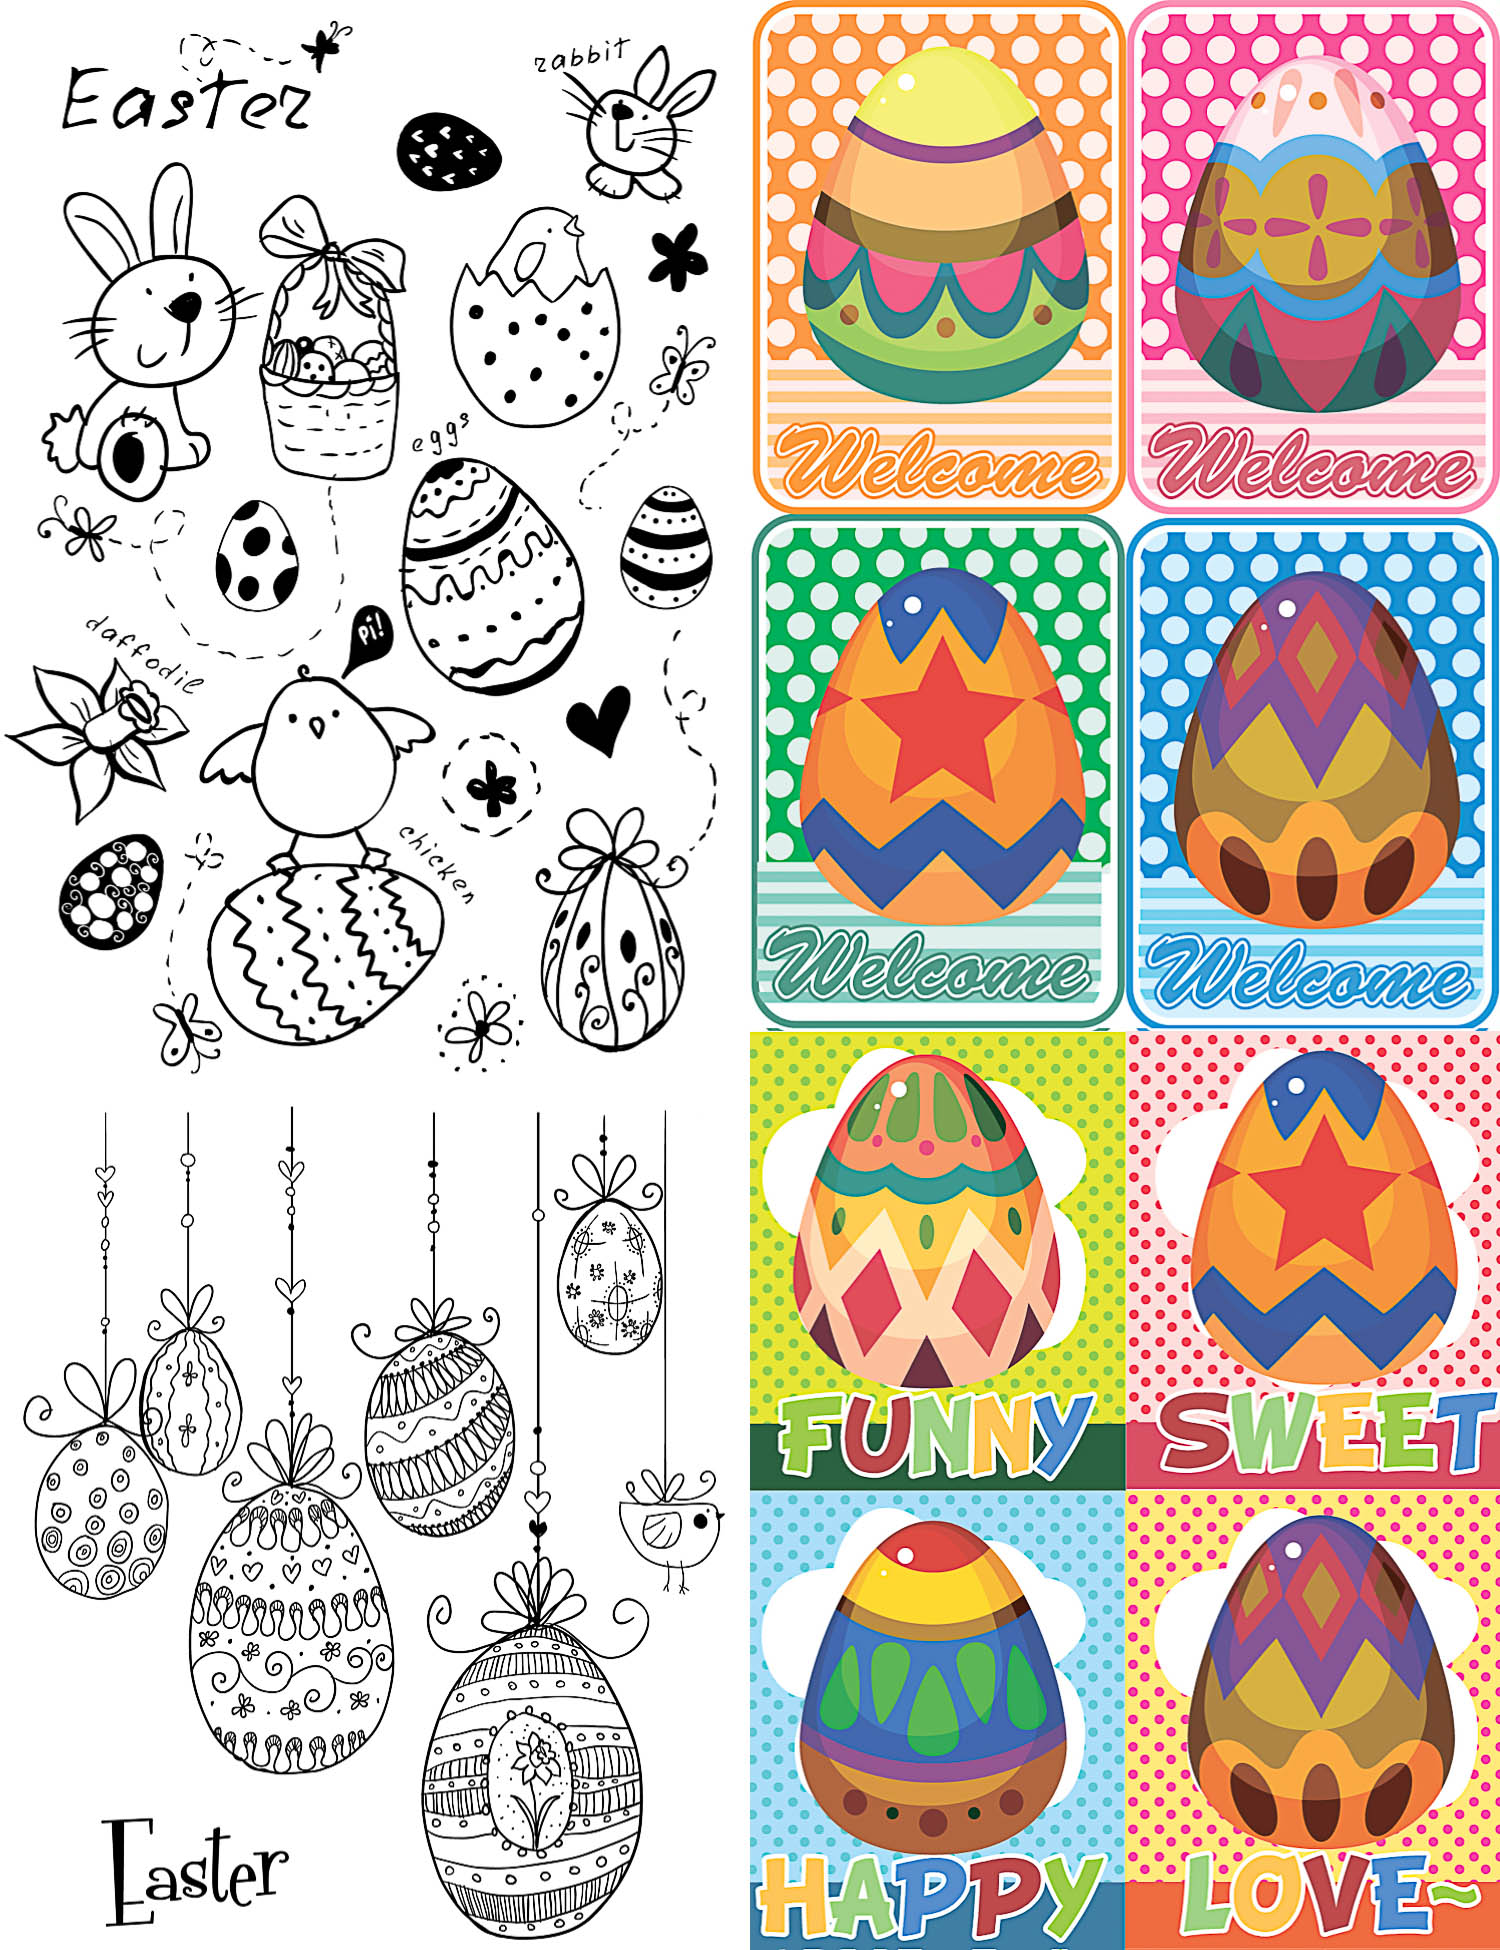 Funny handmade Easter cards vector